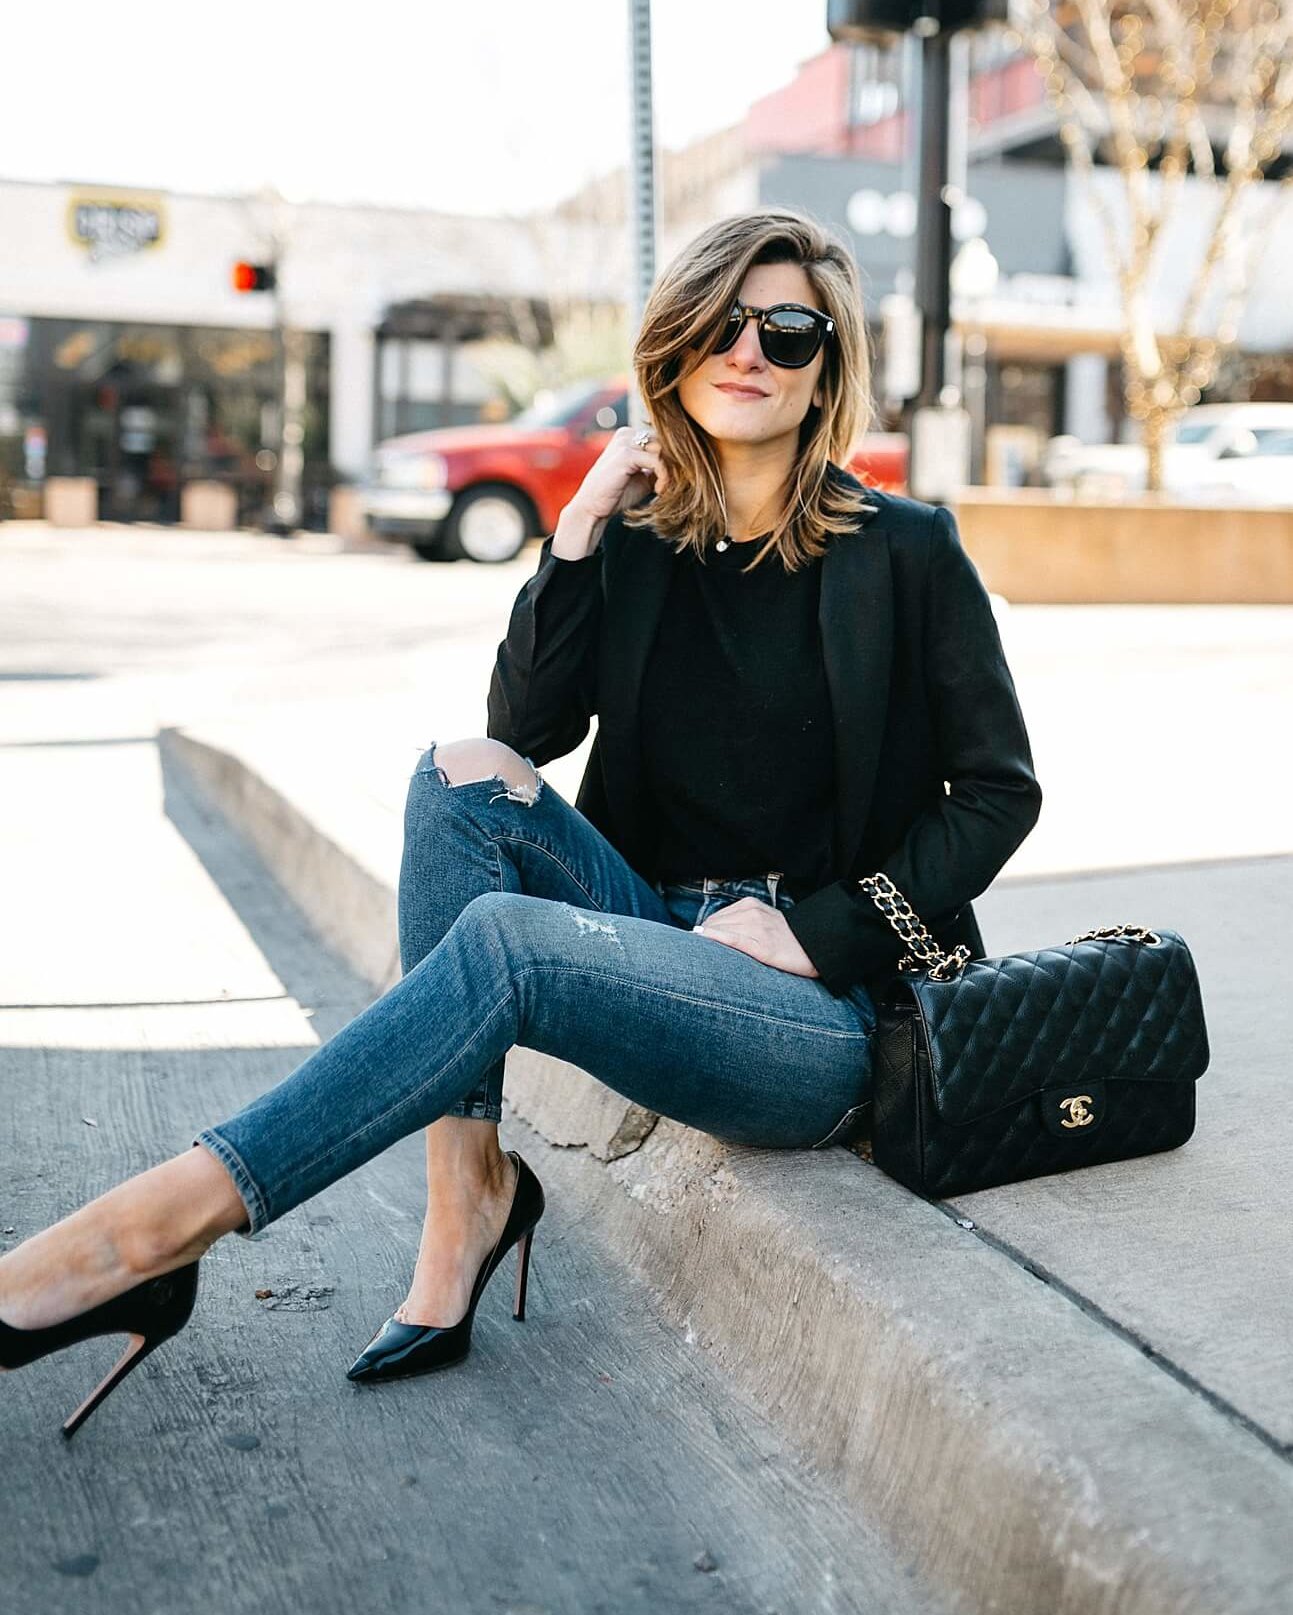 prada patent leather pumps with cropped jeans, black blazer and crewneck tee with chanel jumbo bag